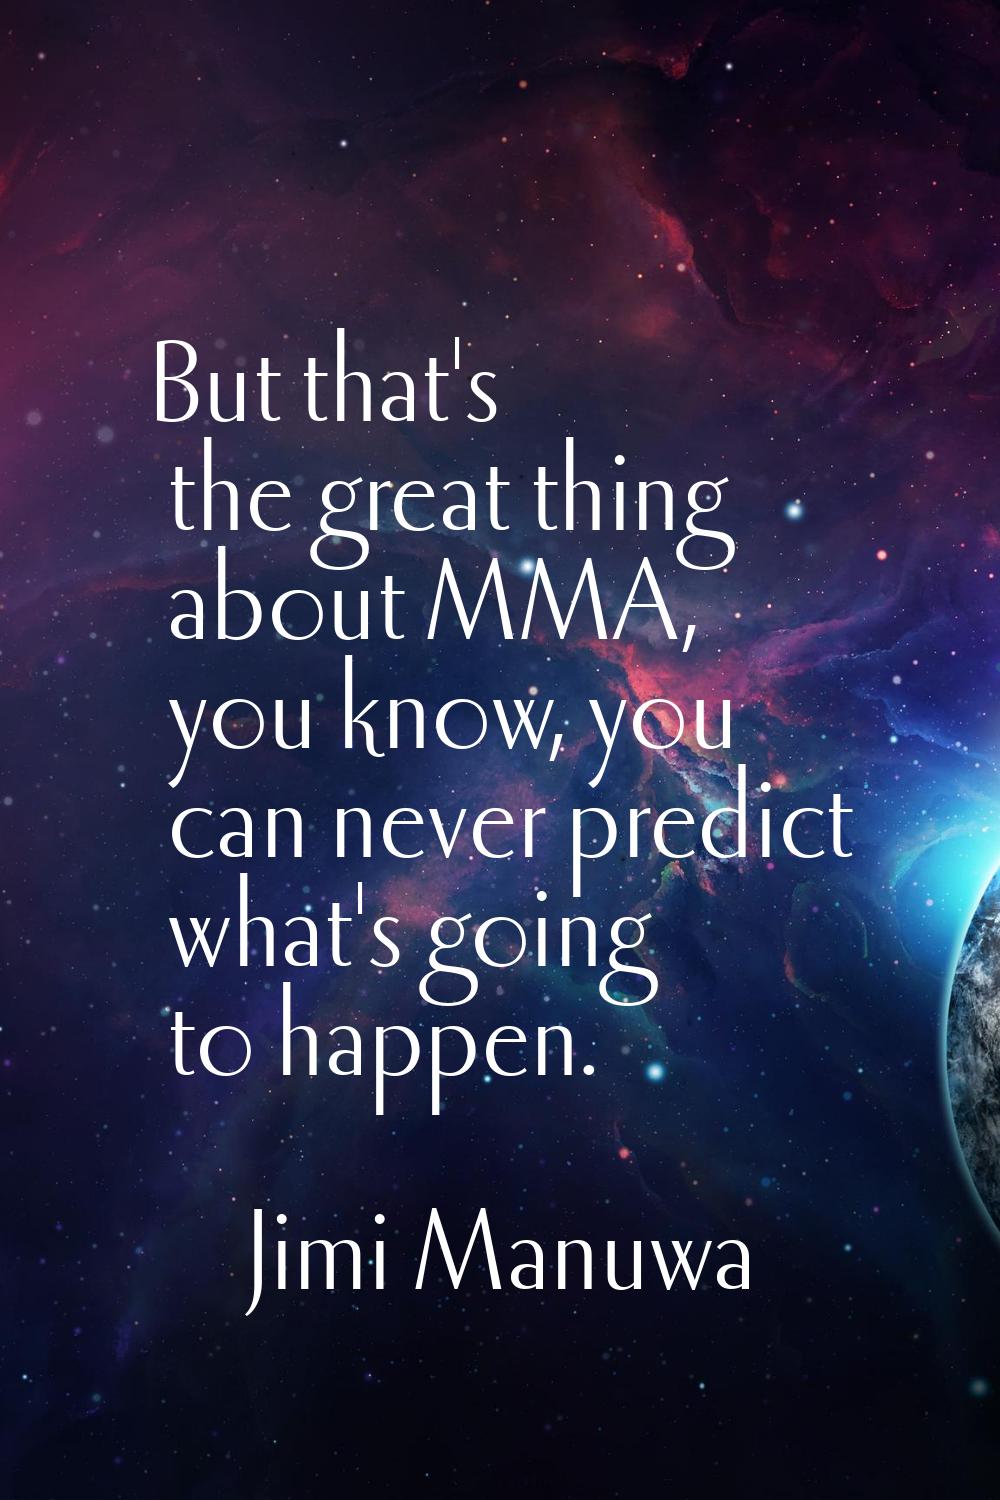 But that's the great thing about MMA, you know, you can never predict what's going to happen.